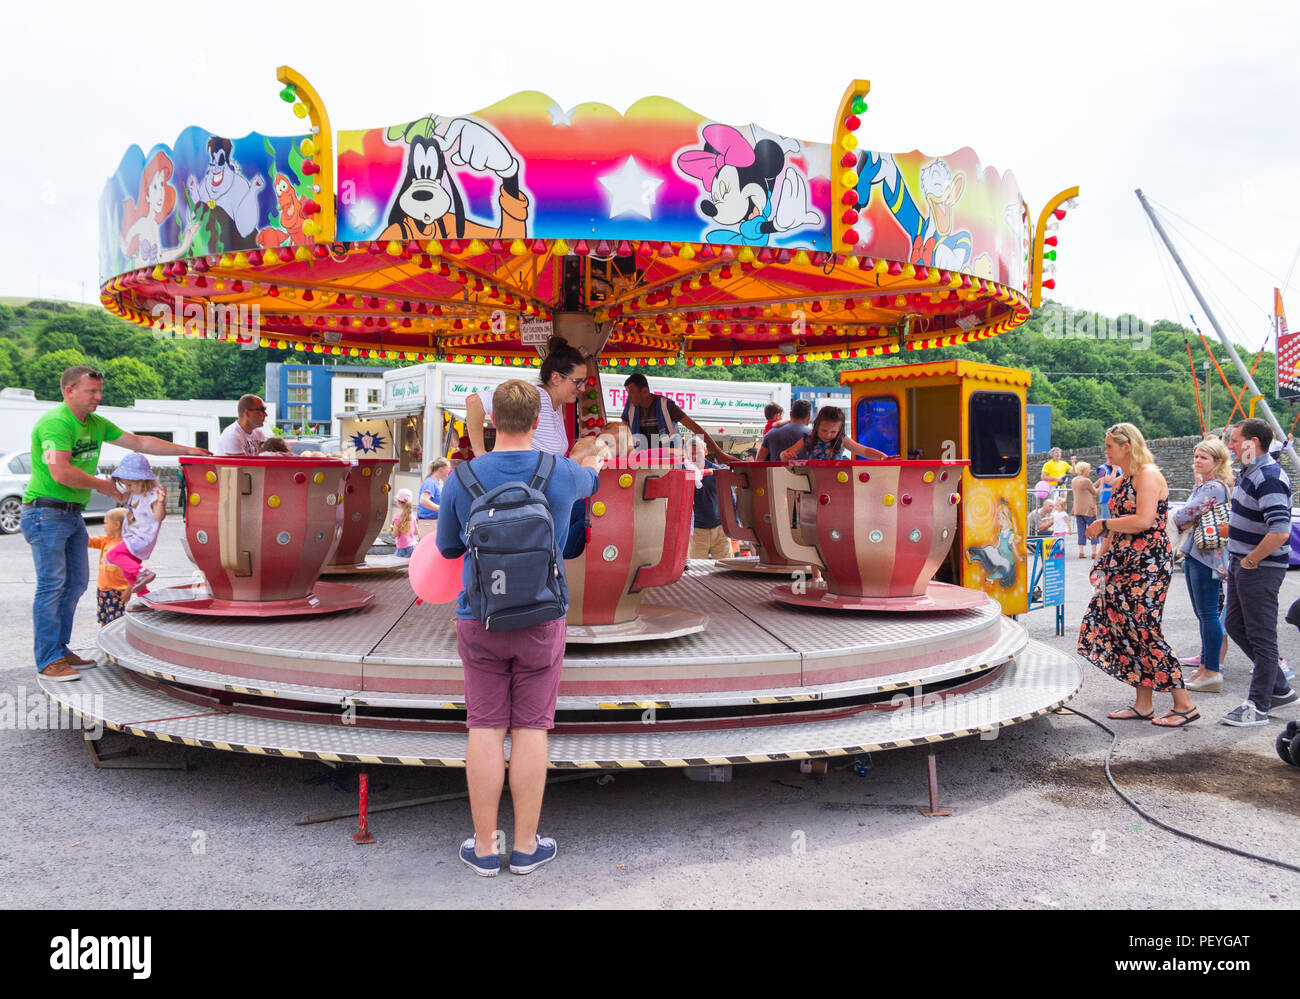 family on summer holiday or vacation on a fairground ride. Stock Photo